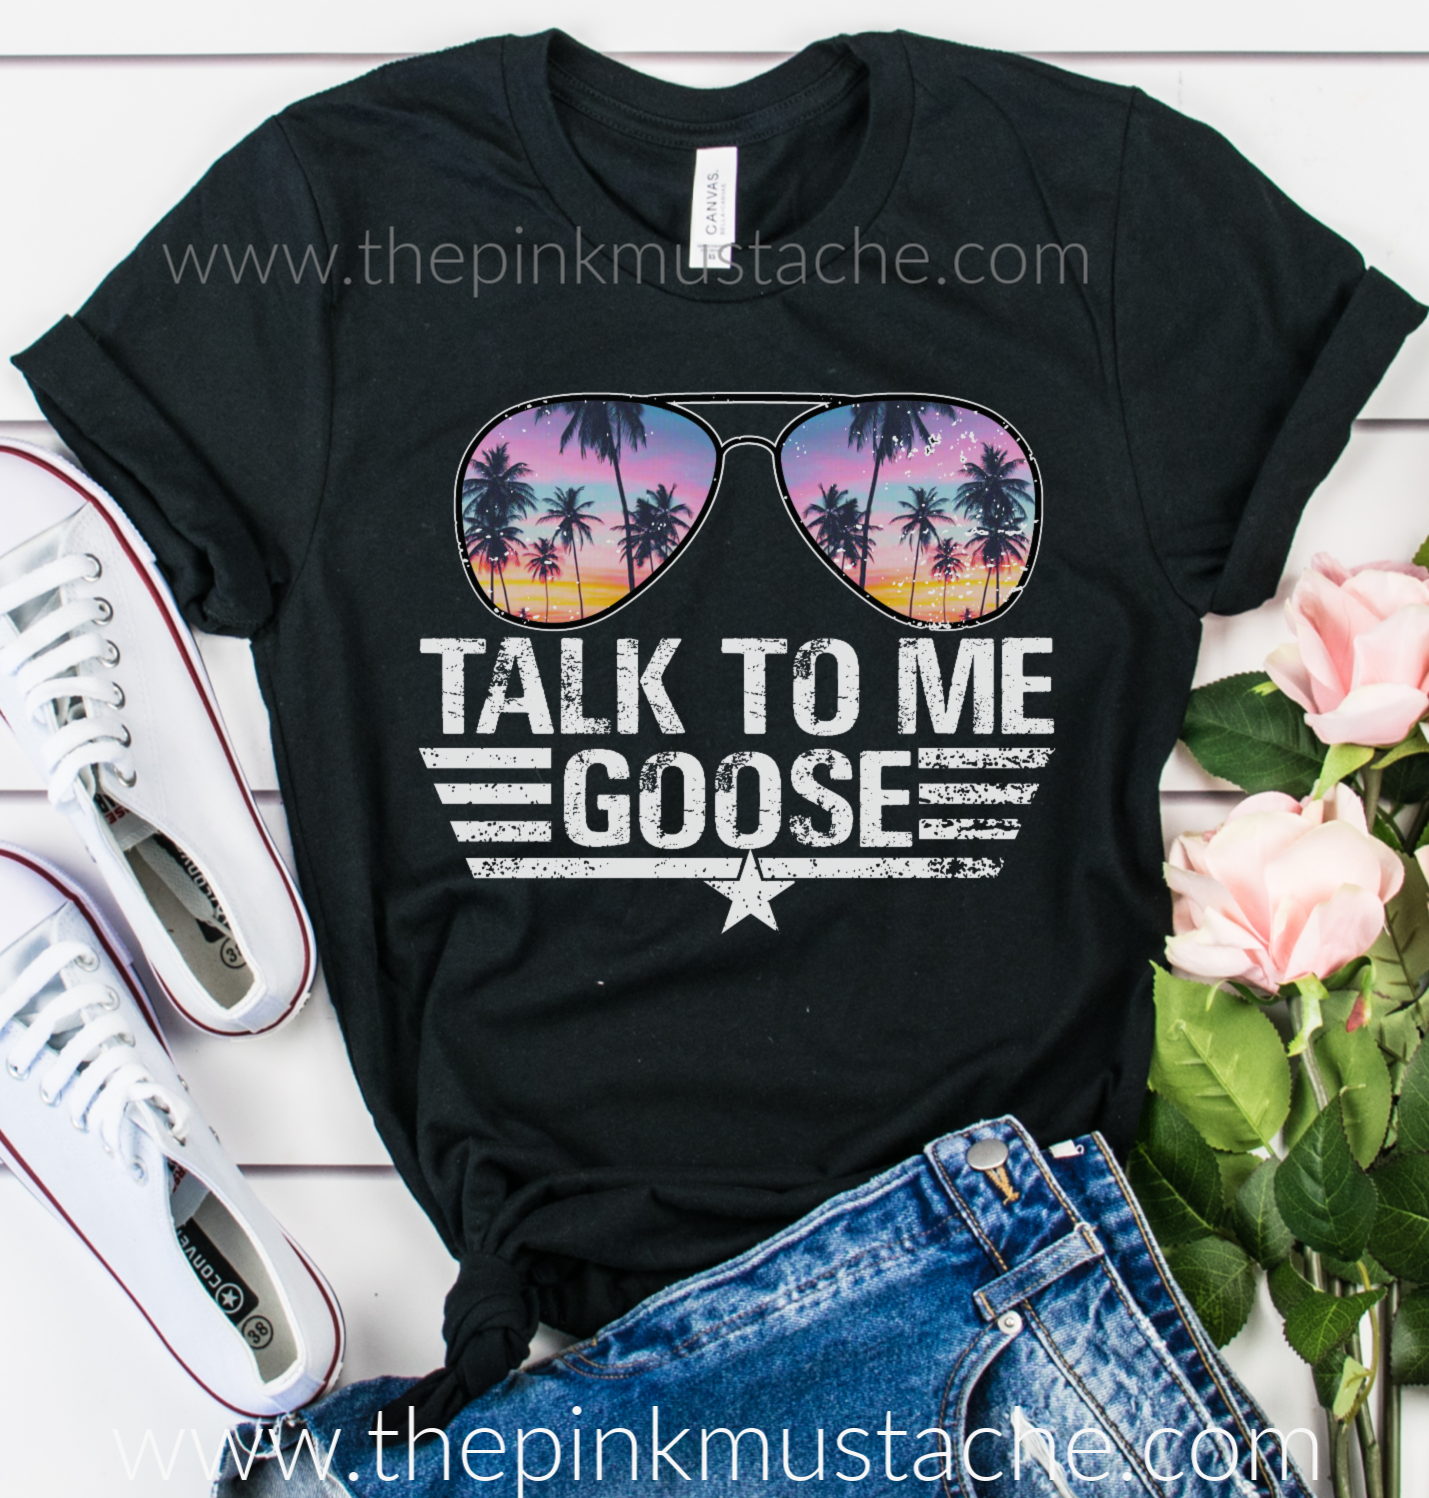 The Pink Mustache Talk to Me Goose T-Shirt Aviators - Bright Colors / Top Gun Inspired Tee / Maverick Goose / Aviators Tee - Top Gun 2 Inspired XS / Black